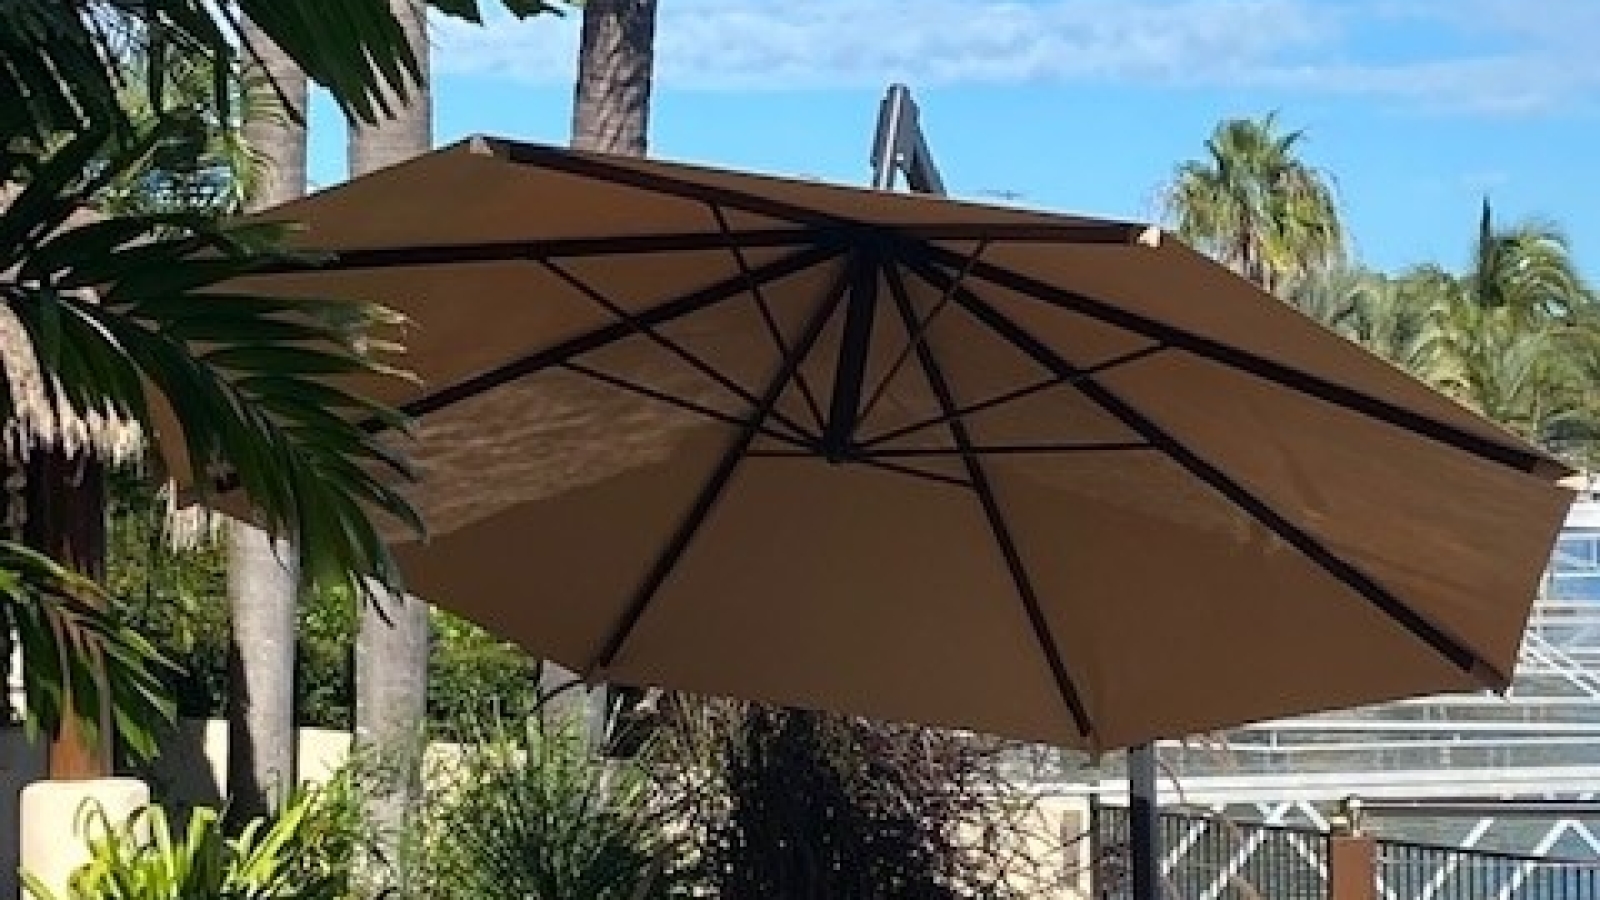 3 Things You Might Not Know About Our Giant Umbrellas